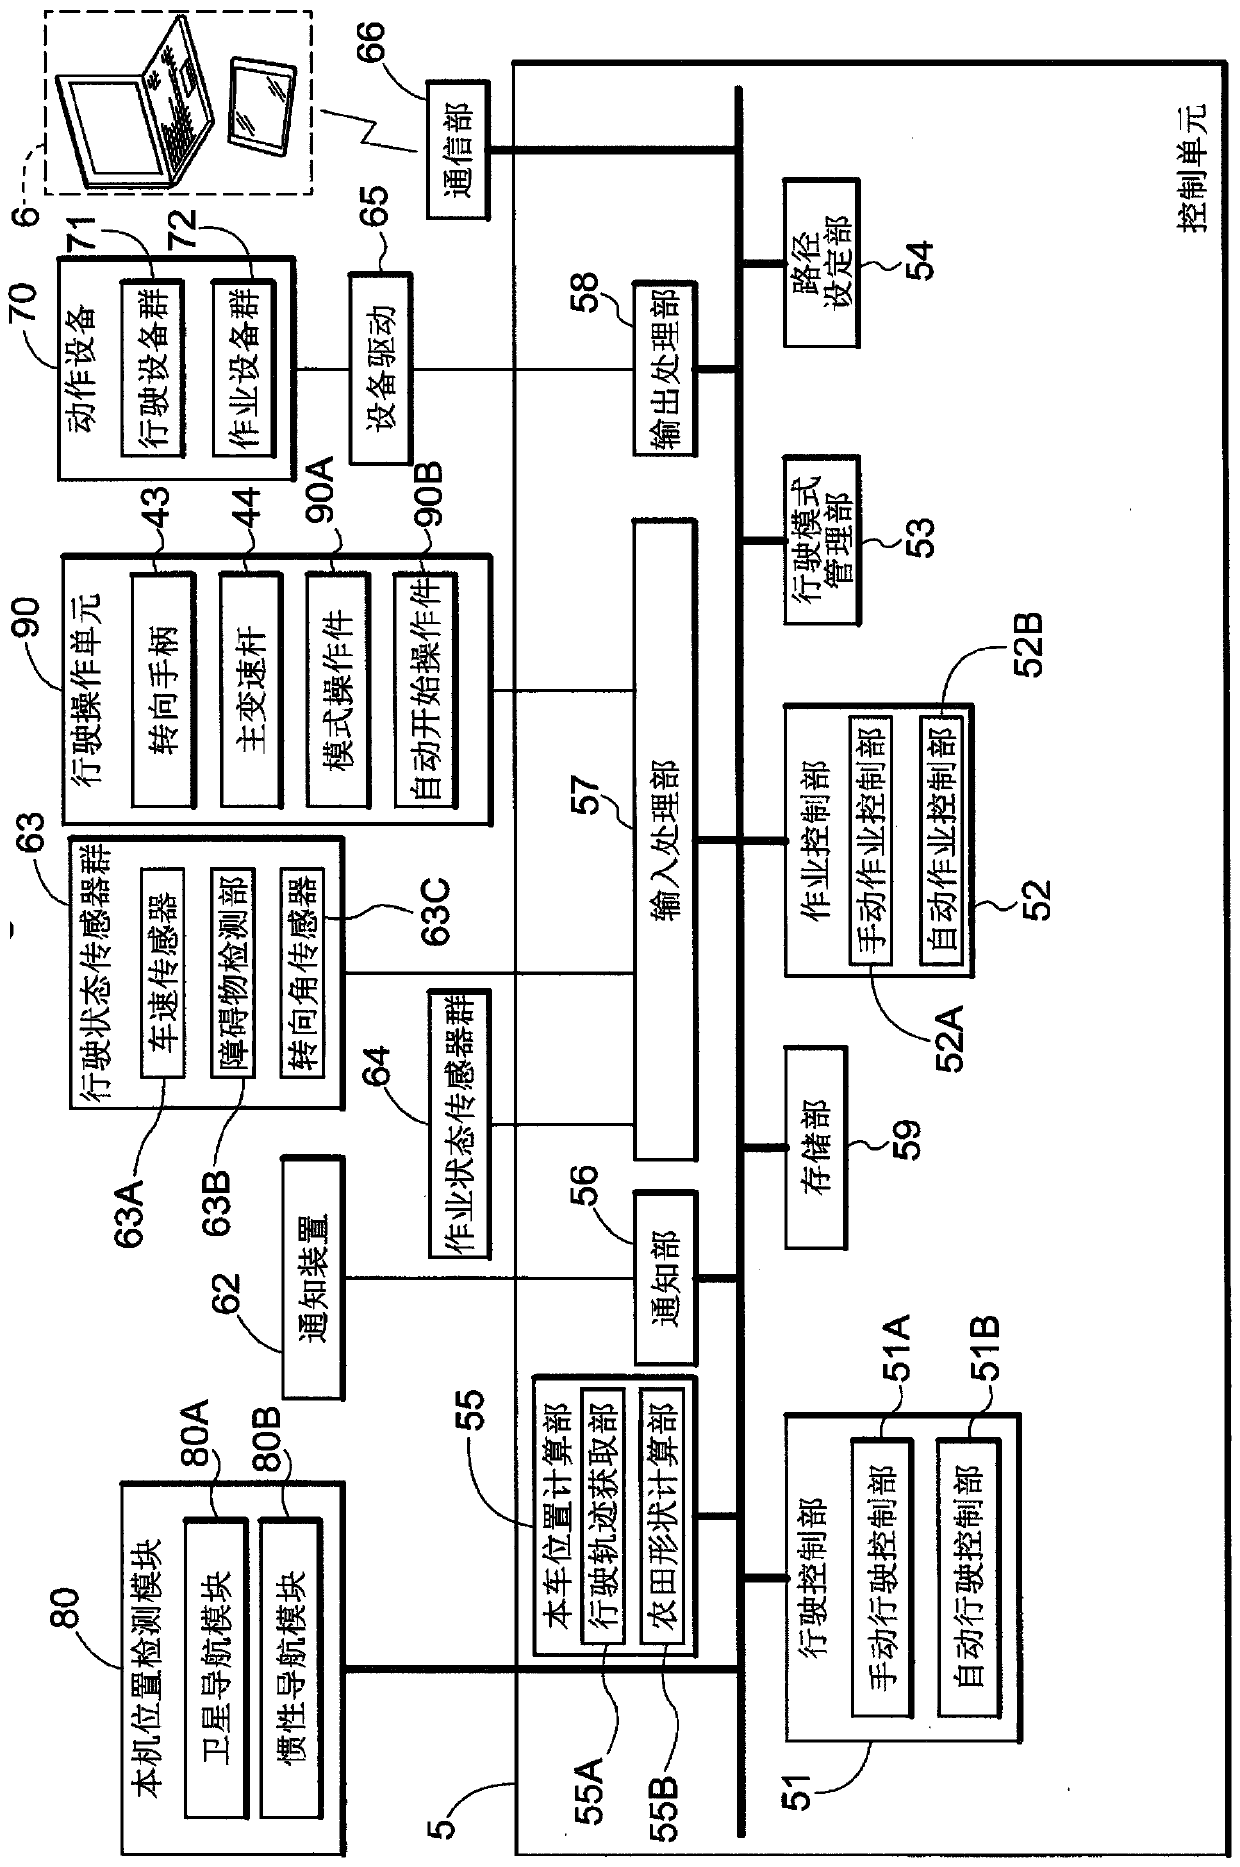 Planting work machine and automatic traveling control system for planting work machine field work vehicle and travel route generation system